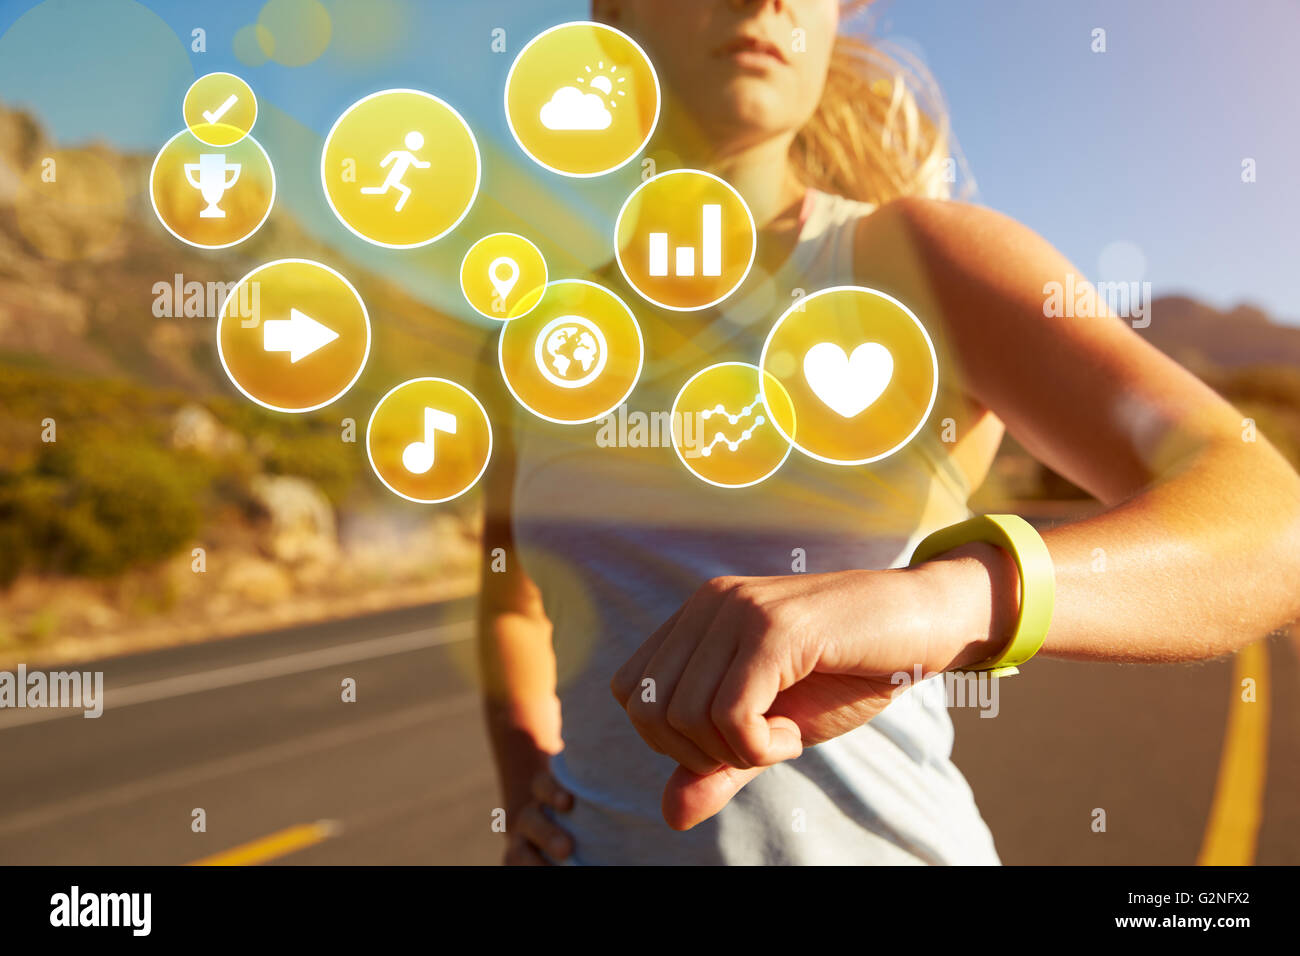 Exercising Woman Checking Activity Tracker With Health Icons Stock Photo